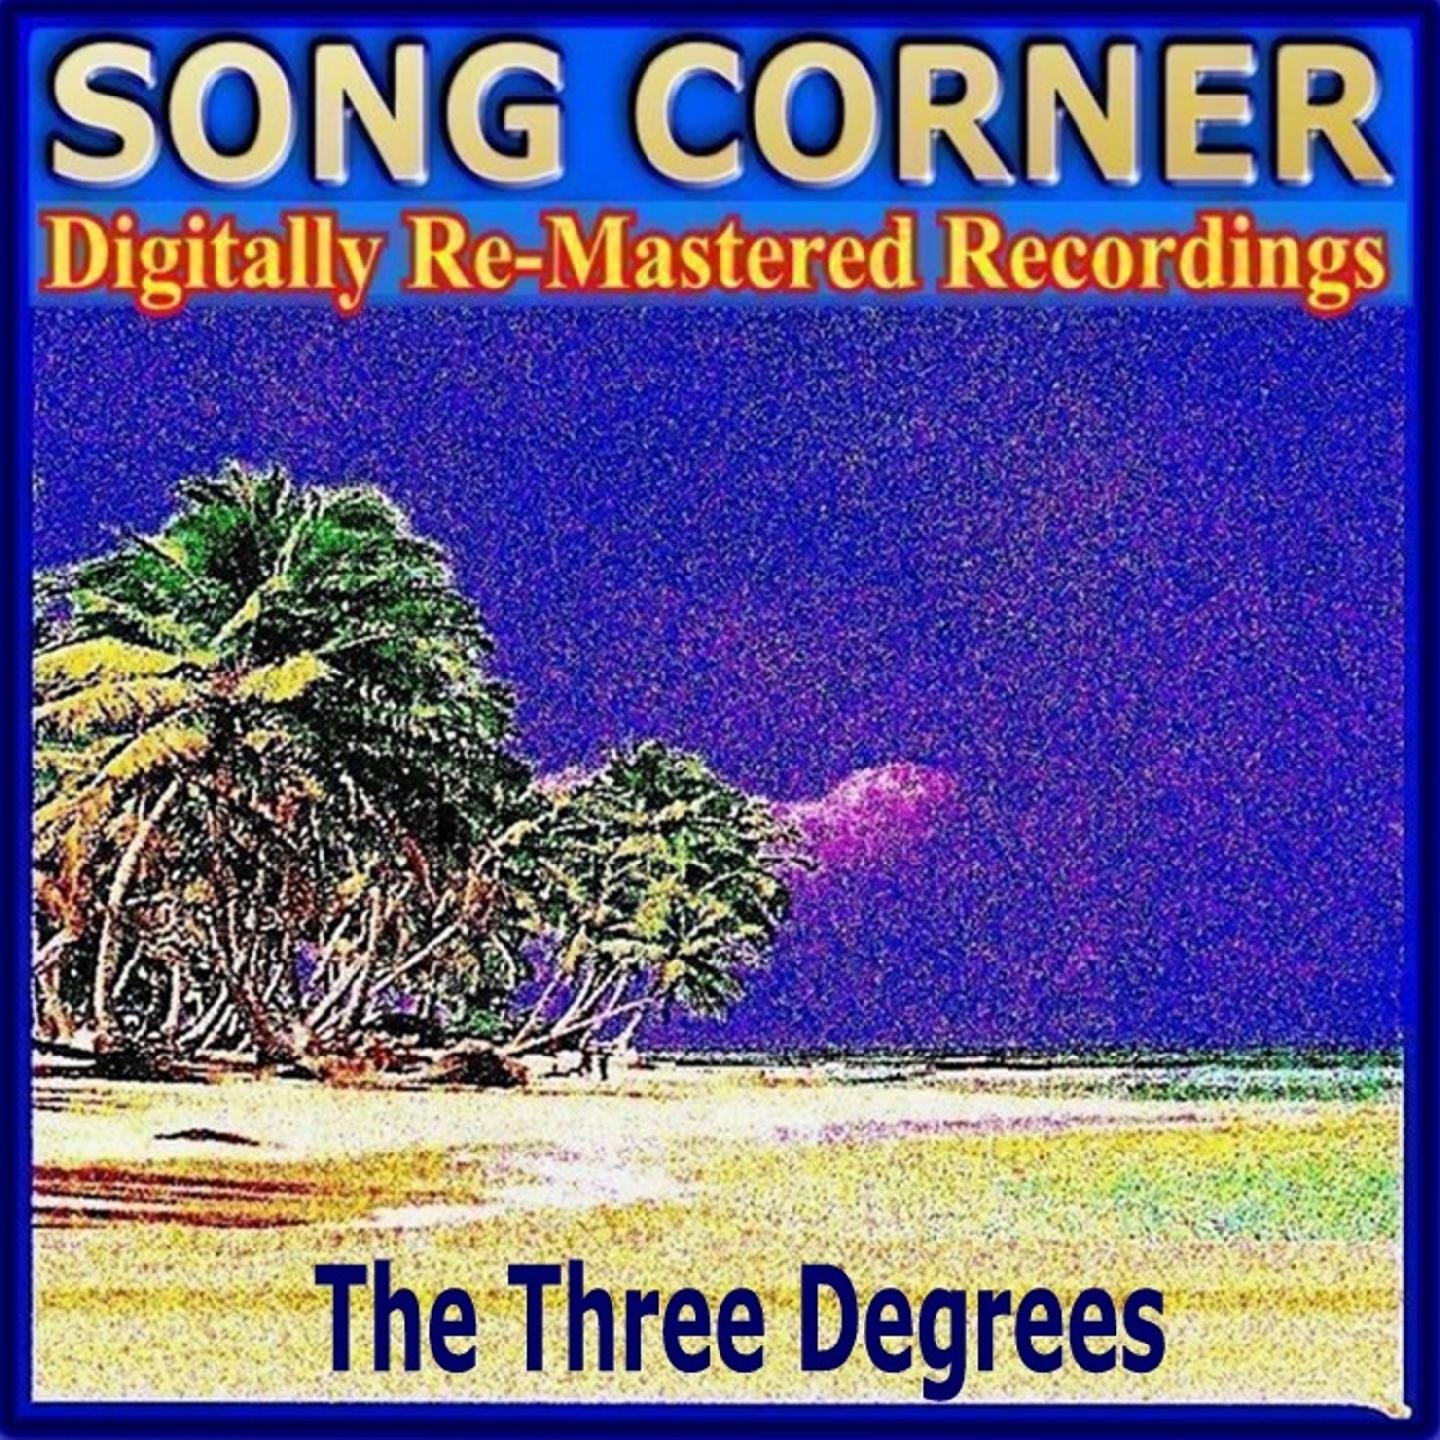 Song Corner - the Three Degrees